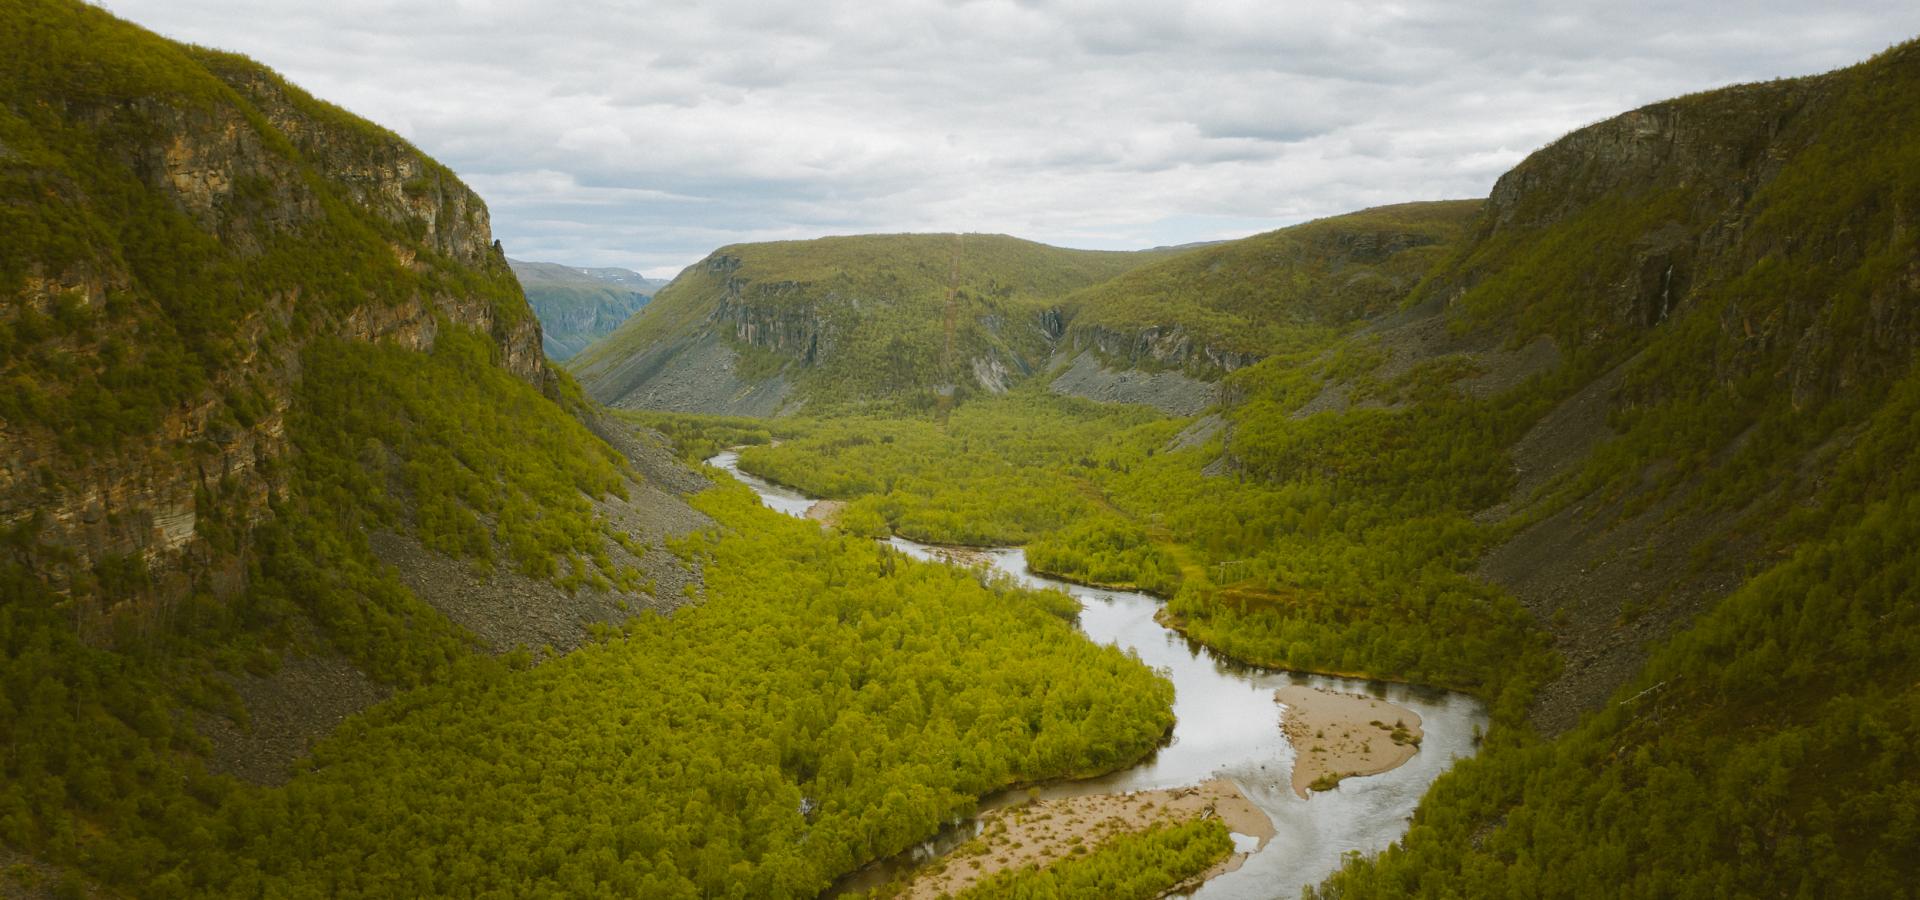 Birdseye view of the Reisa River and the valley with the green forest and the mountainsides